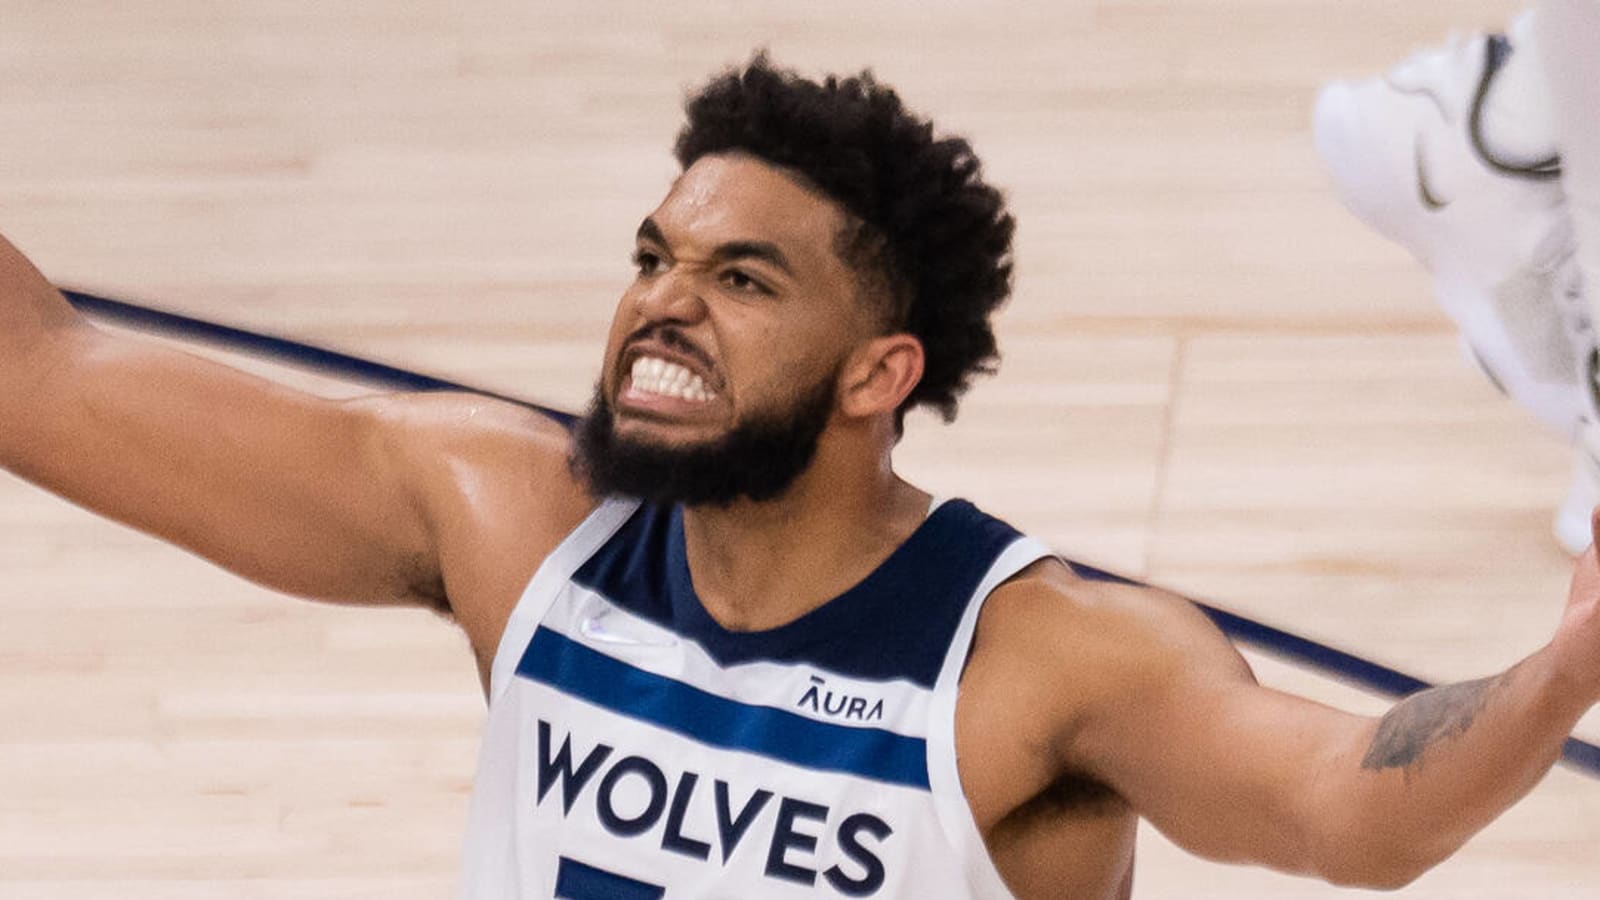 Karl-Anthony Towns shares dream to retire in Minnesota: 'This place has a special energy'